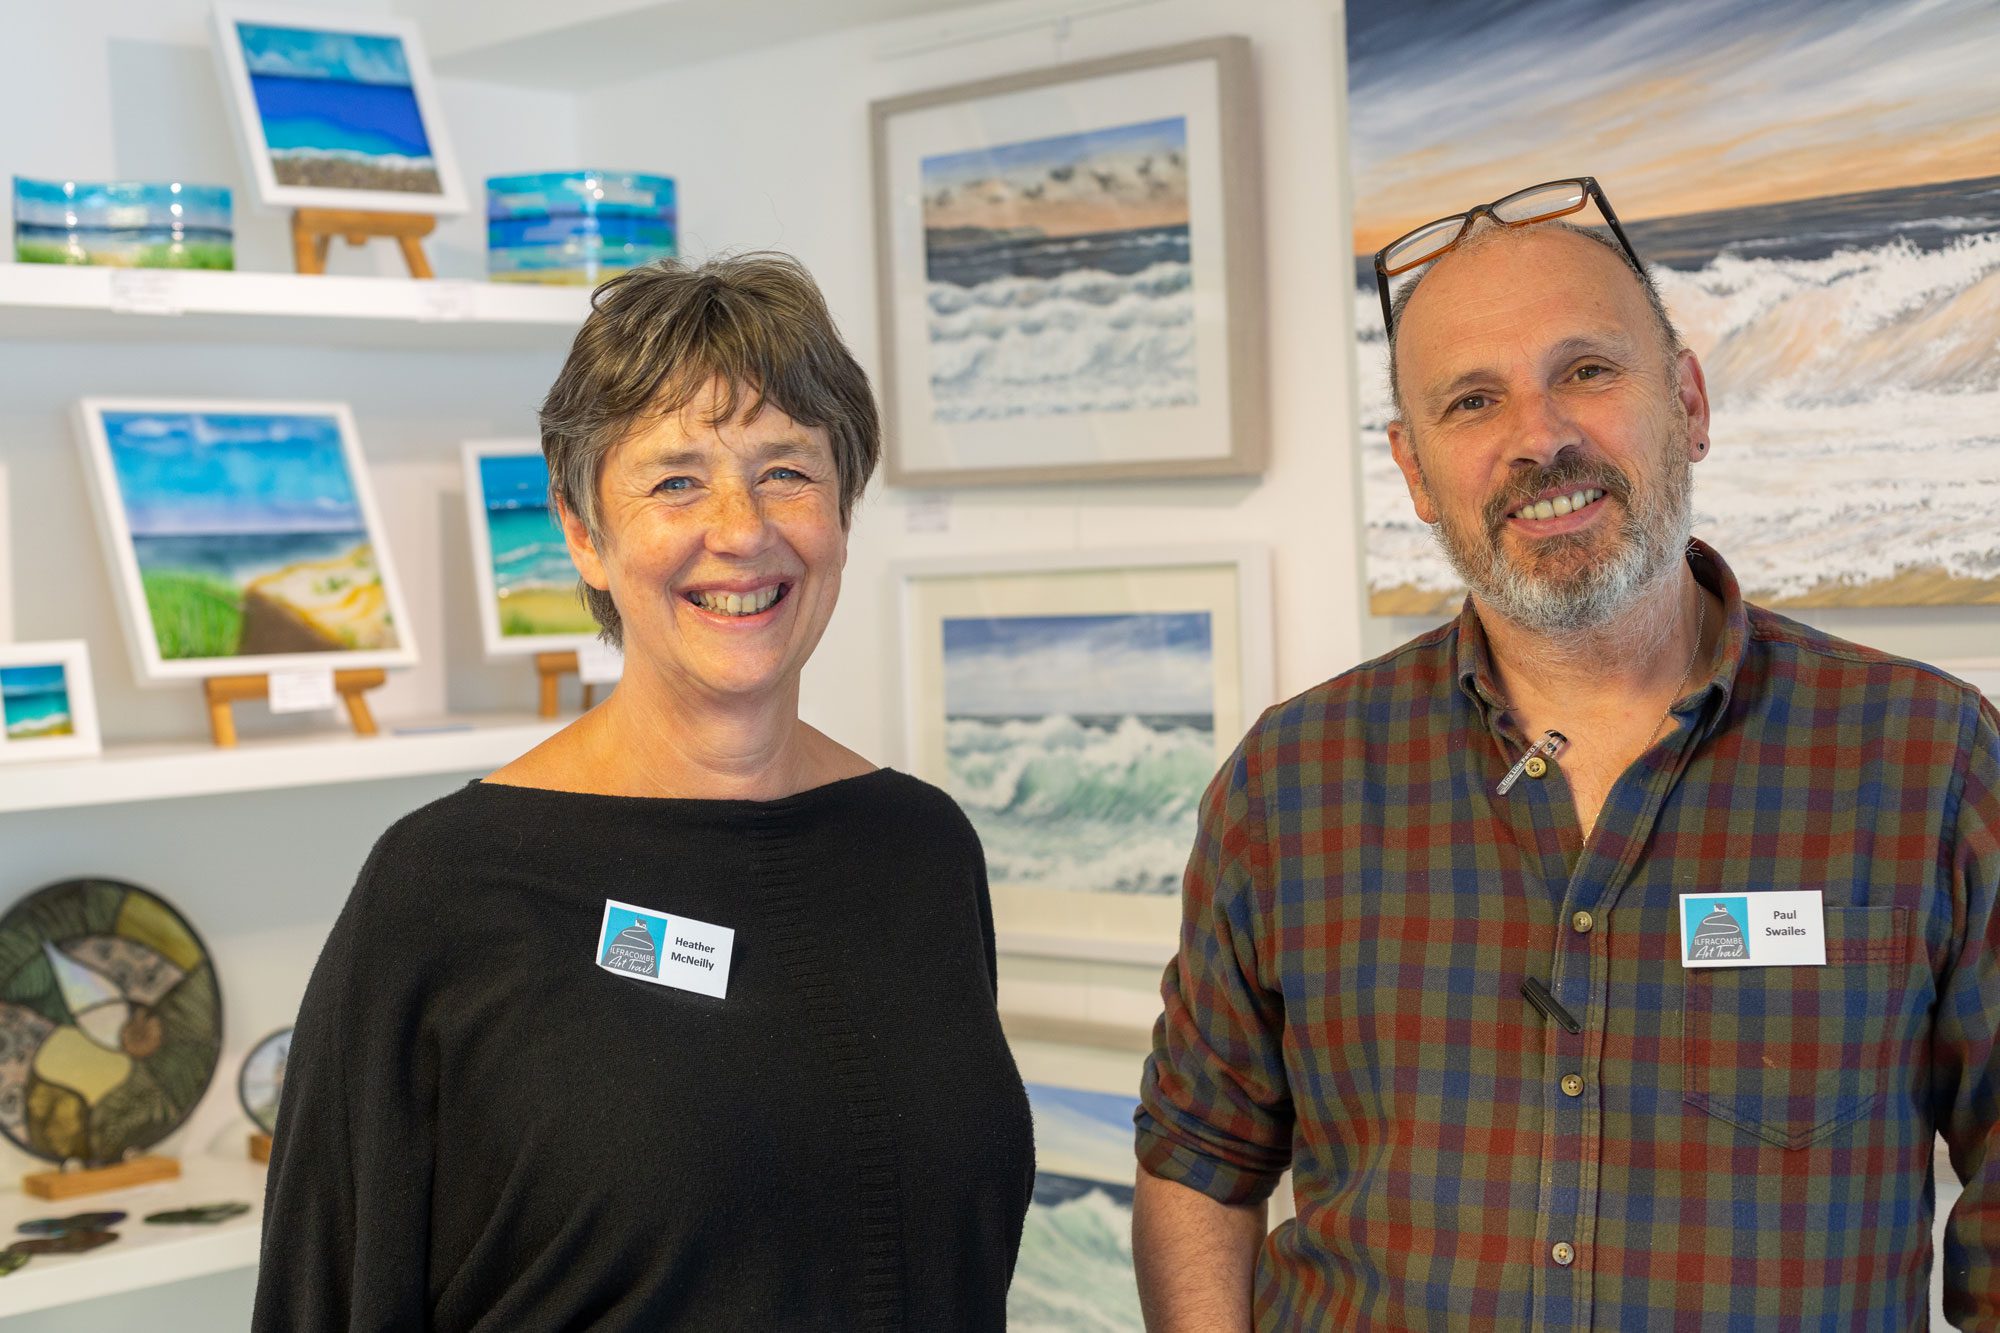 Paul Swailes & Heather McNeilly, two co-founders of The Pier Gallery stood in front of artwork in the gallery